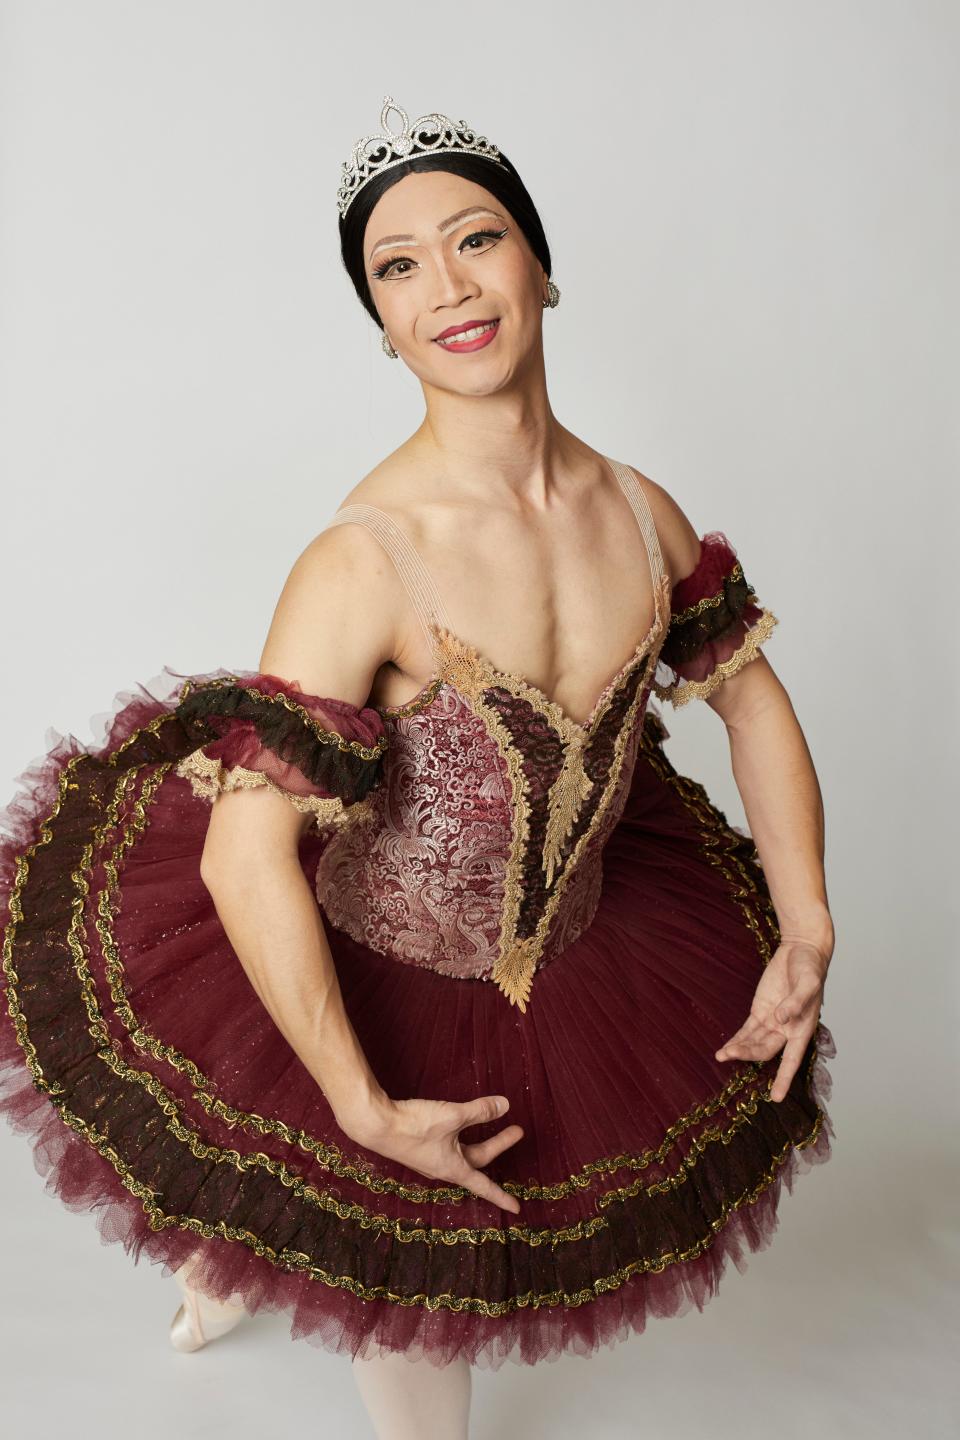 Tokyo-born, Texas-trained dance Shohei Iwahama — stage name Anya Marx — will perform with Les Ballets Trockadero de Monte Carlo at Bass Concert Hall on Jan. 19.